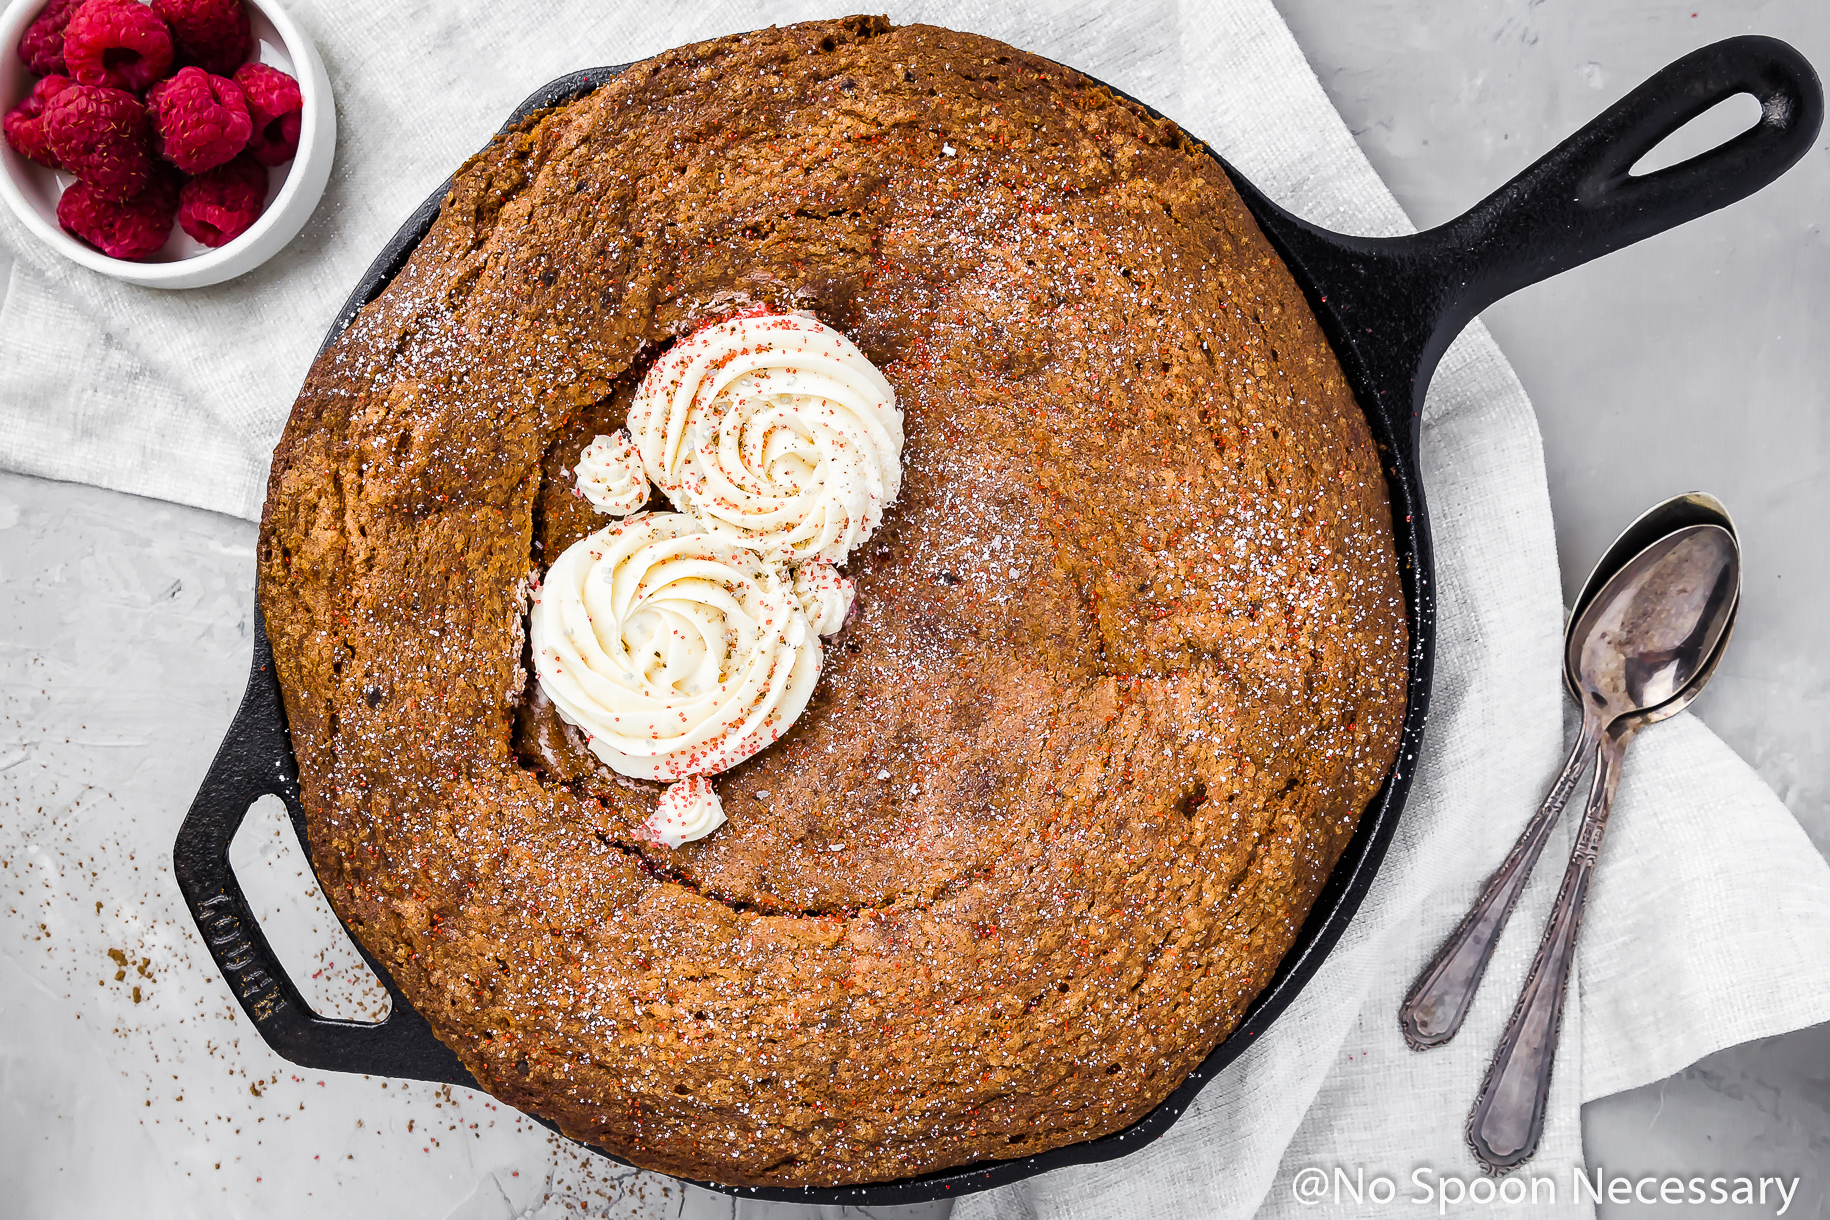 Overhead shot of a Chocolate Velvet Skillet Cake decorated with two "roses" of Cream Cheese Frosting on a gray surface and neural linen, with spoons and a ramekin of raspberries in the corner of the shot.